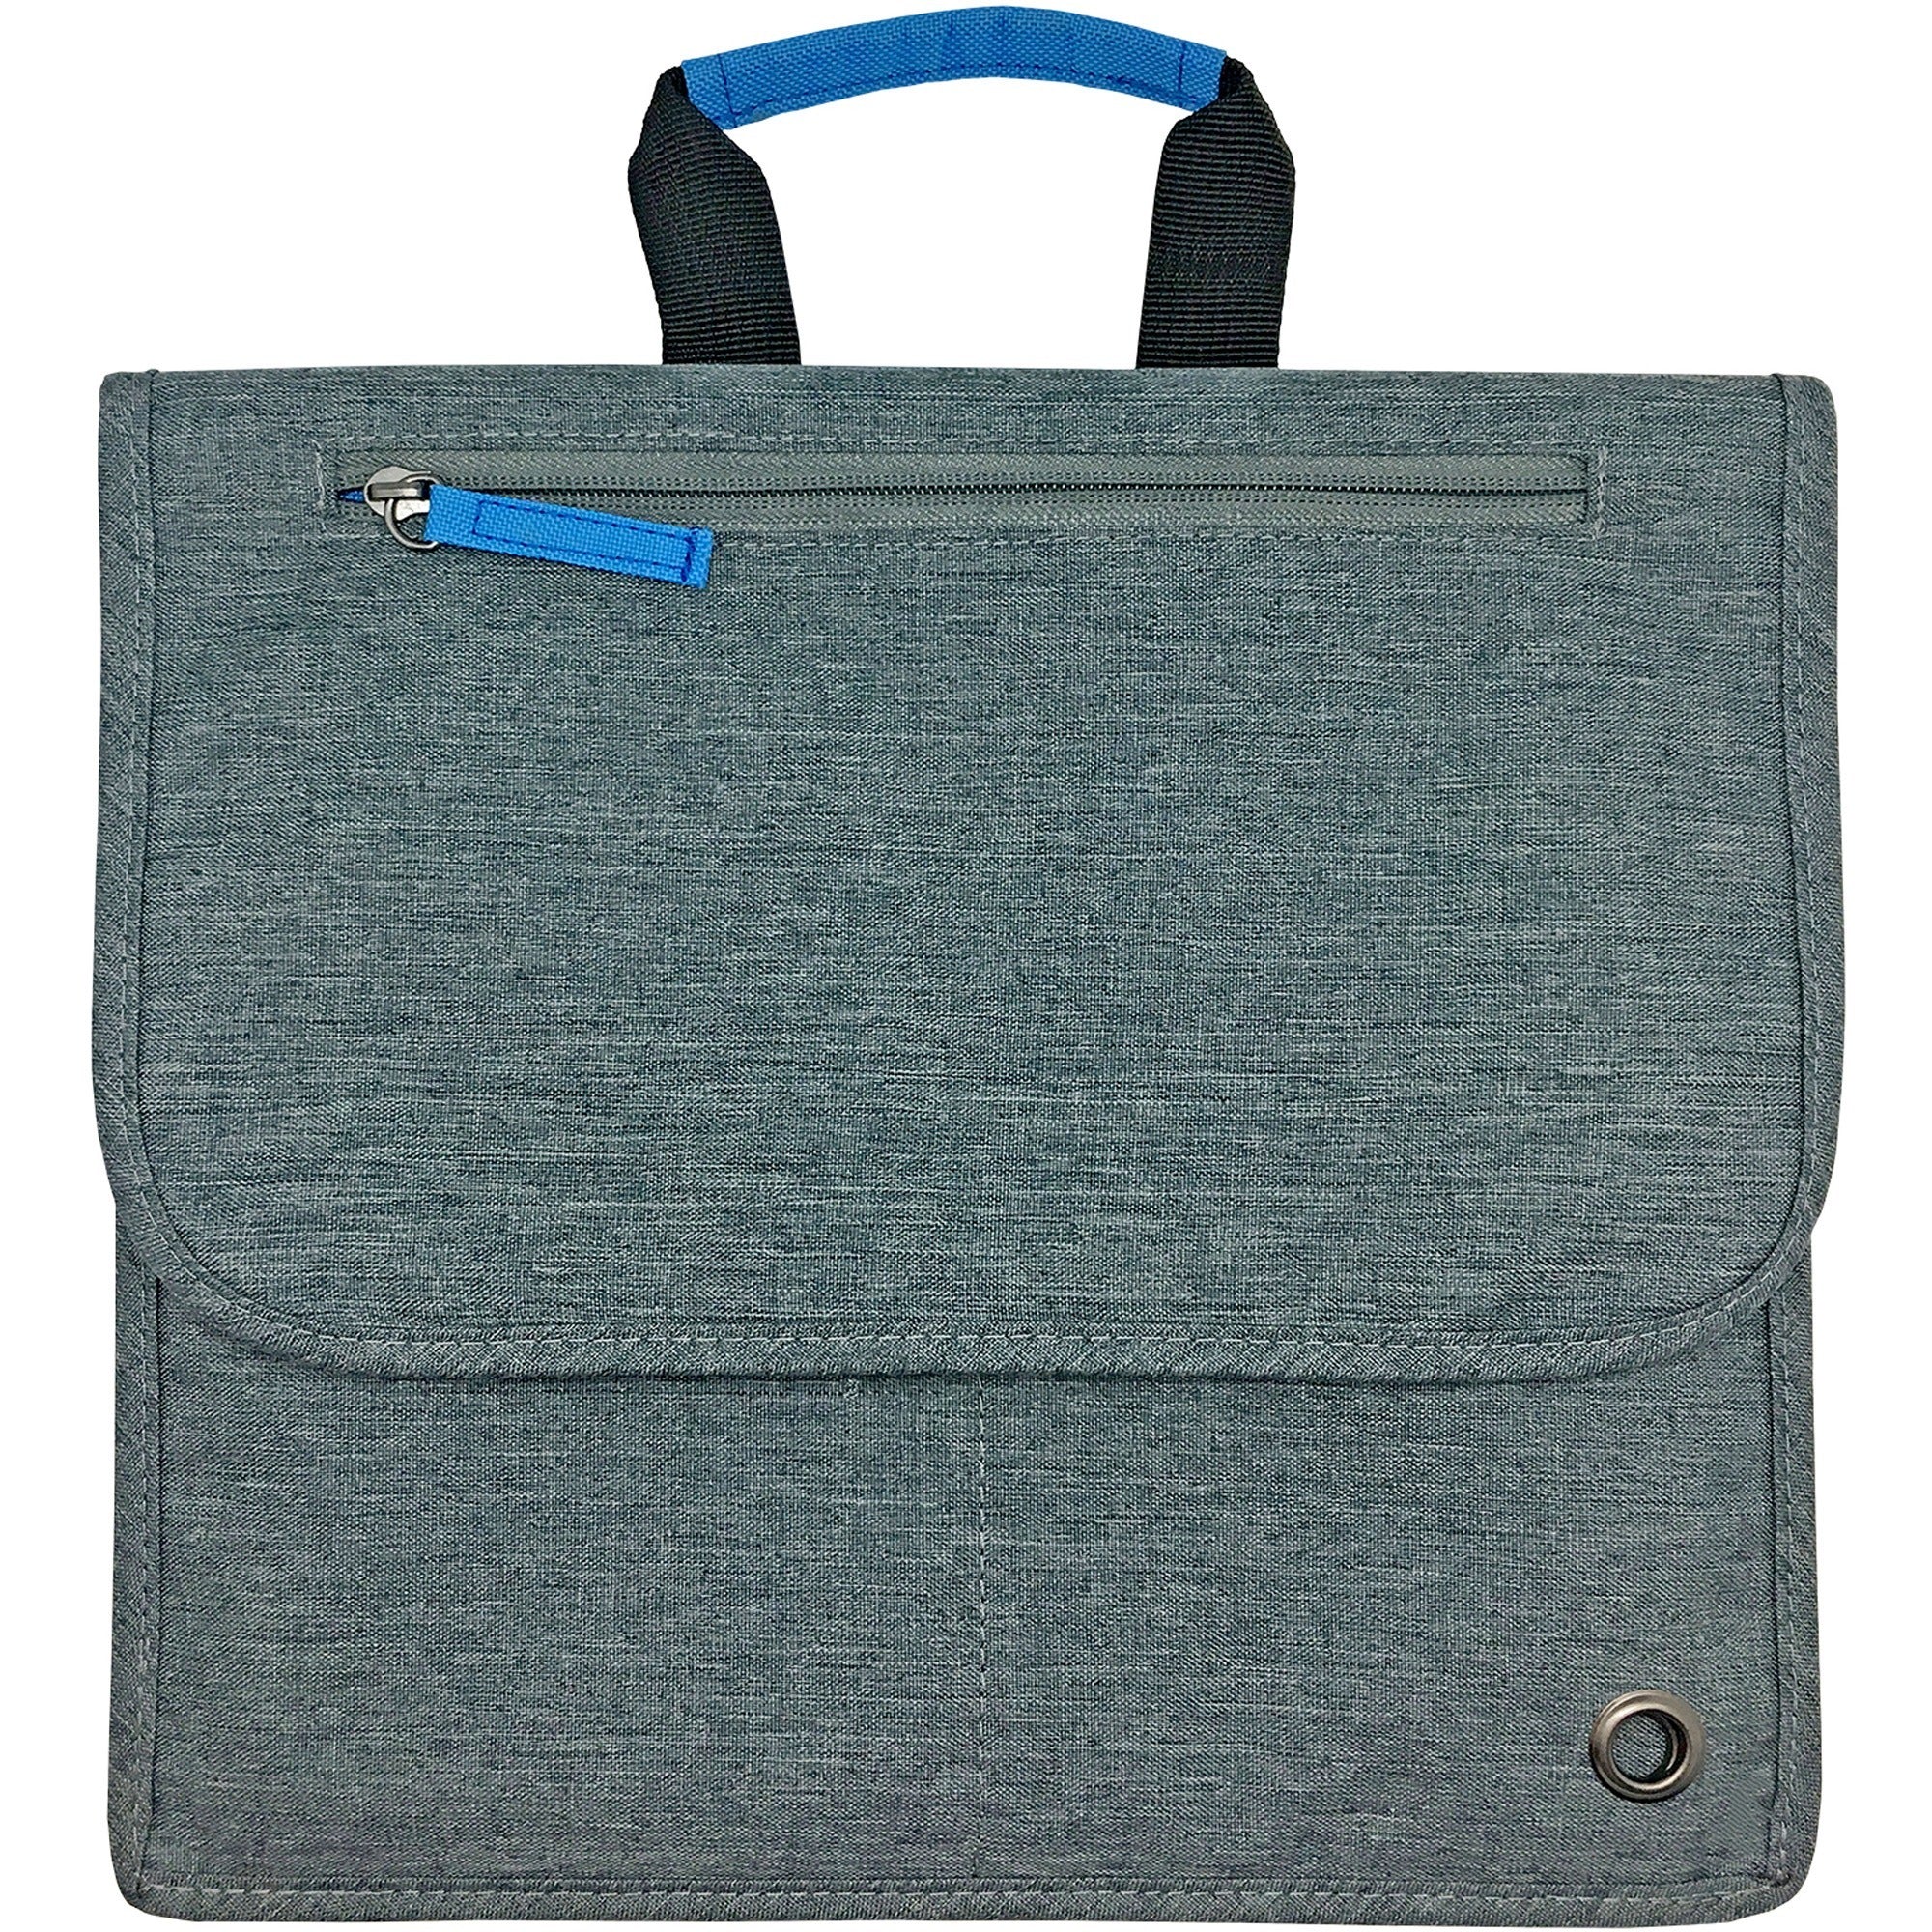 so-mine-carrying-case-travel-essential-gray-18-height-x-118-width-x-08-depth-1-each_osmsm422 - 1